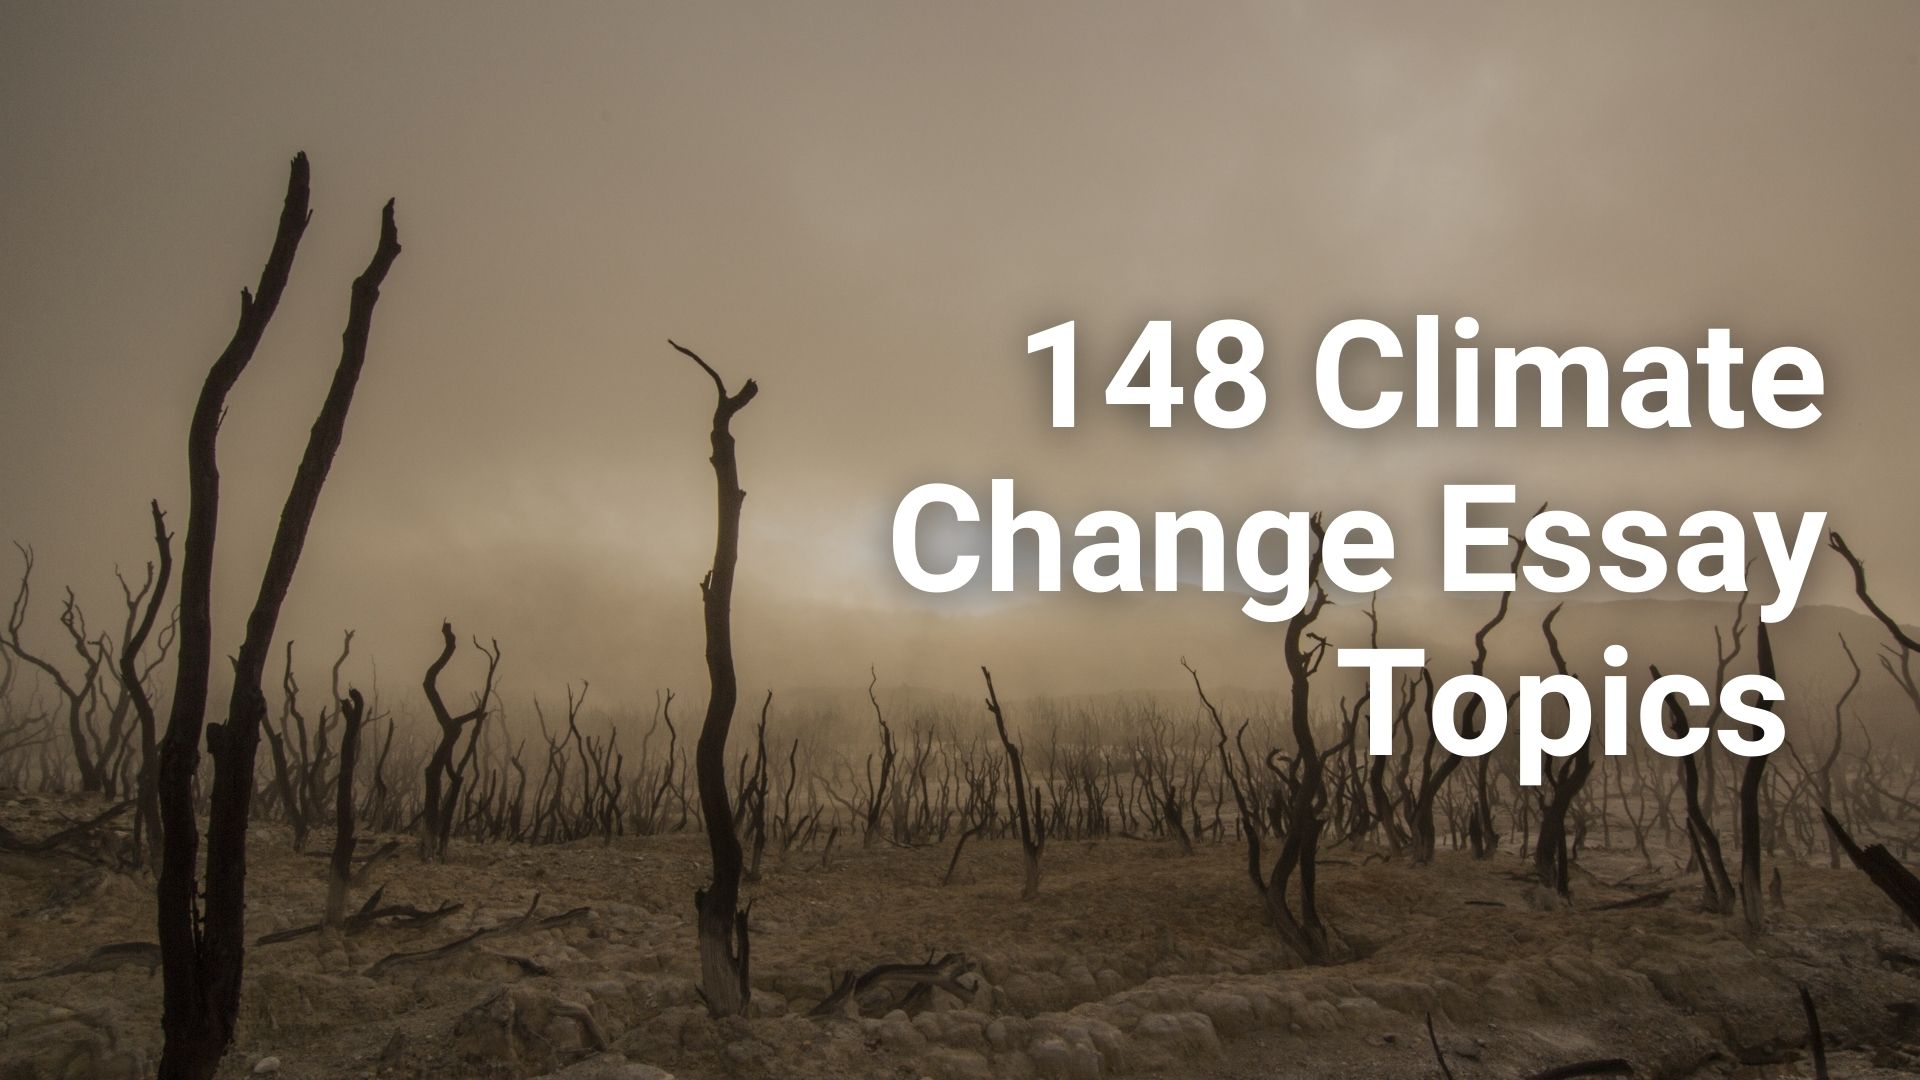 148 Thought-Provoking Climate Change Essay Topics